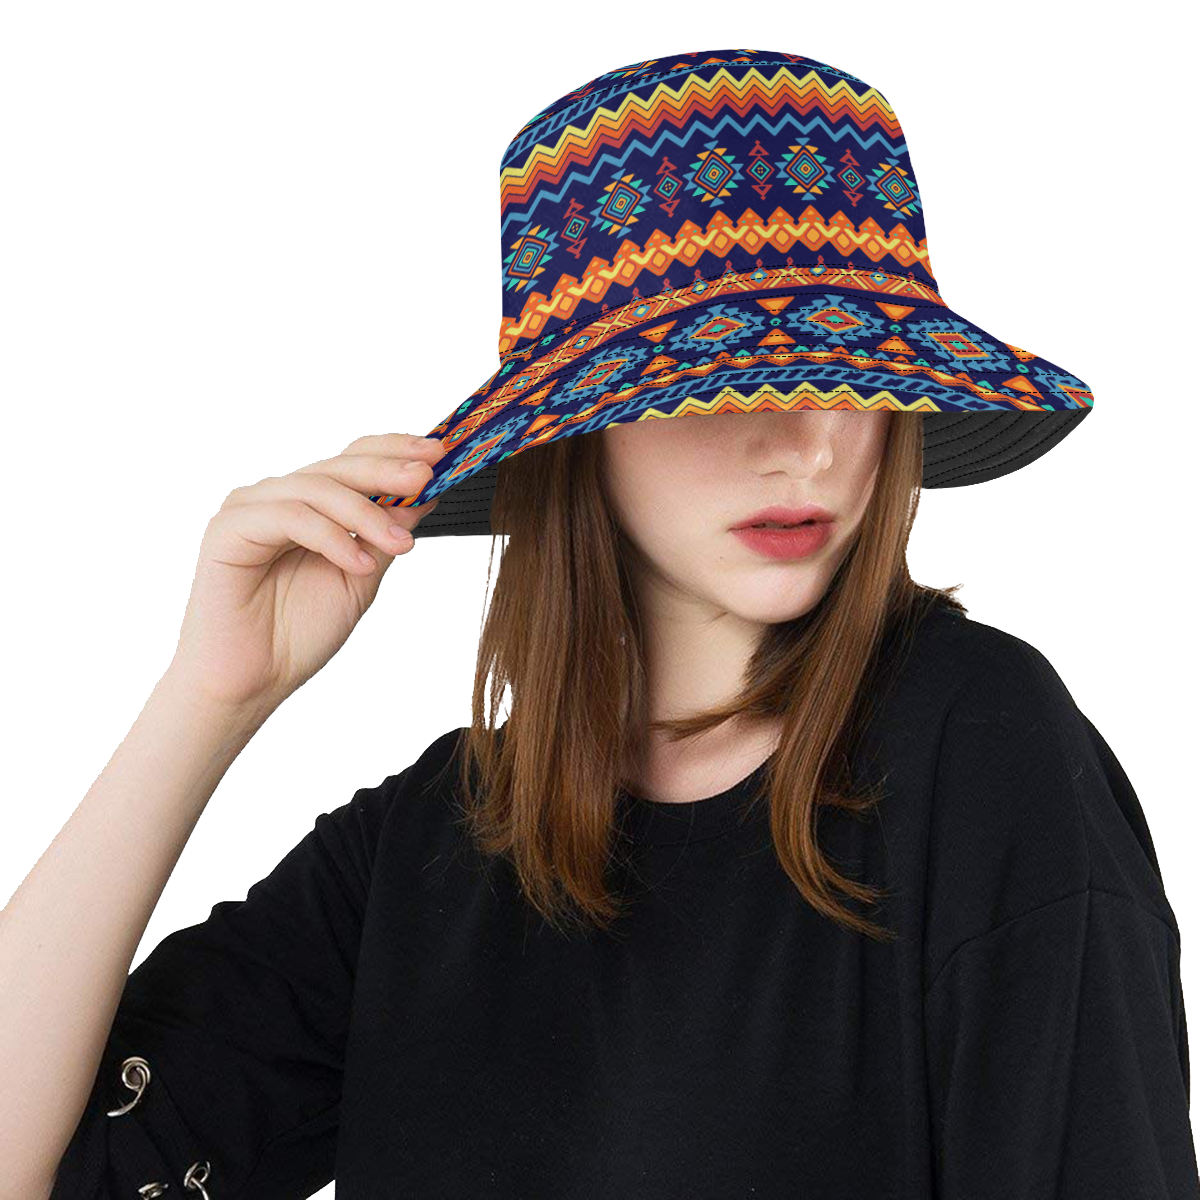 Awesome Ethnic Boho Design All Over Print Bucket Hat